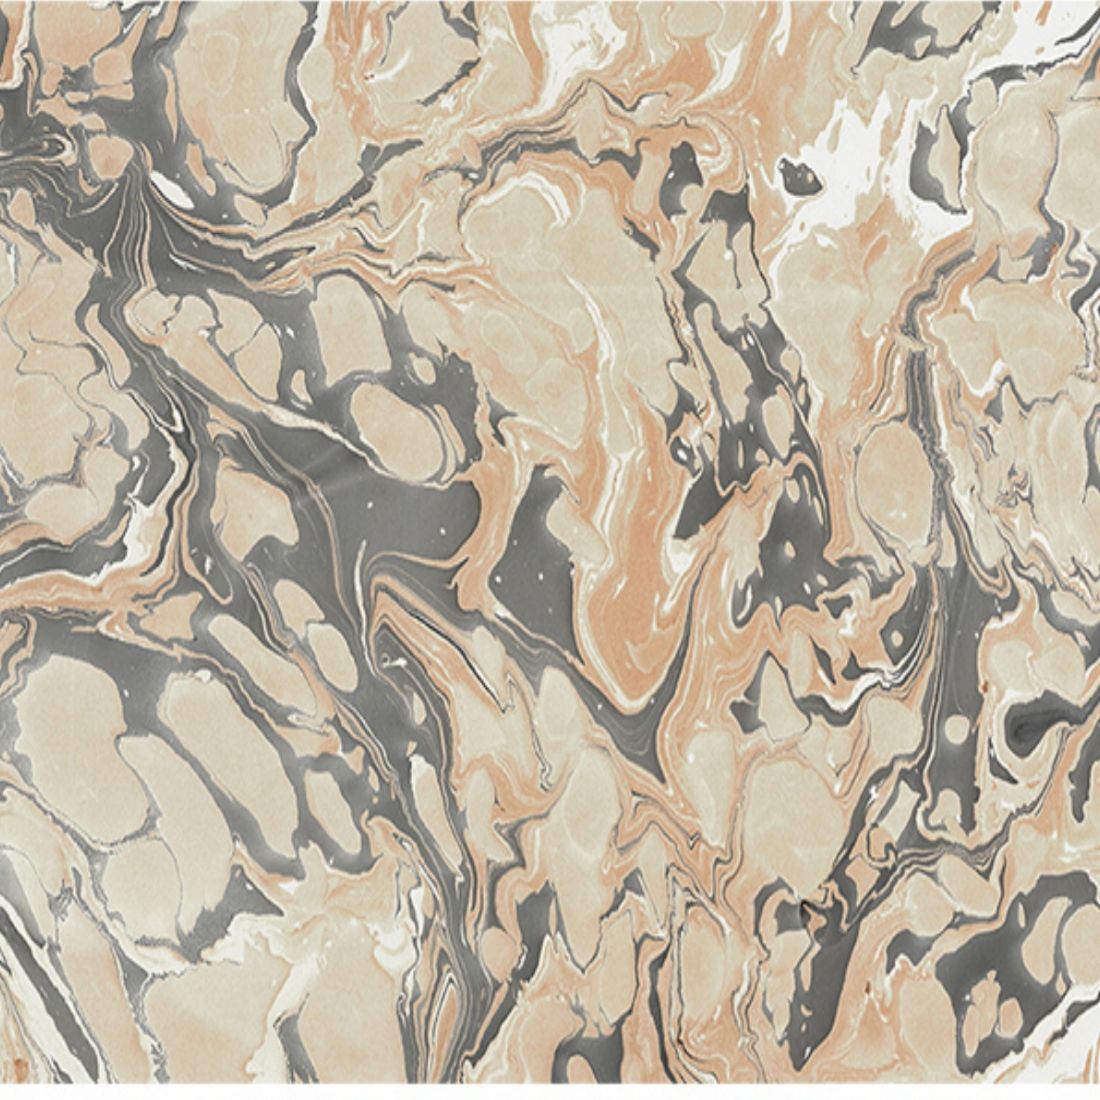 Paper Marbling Textures